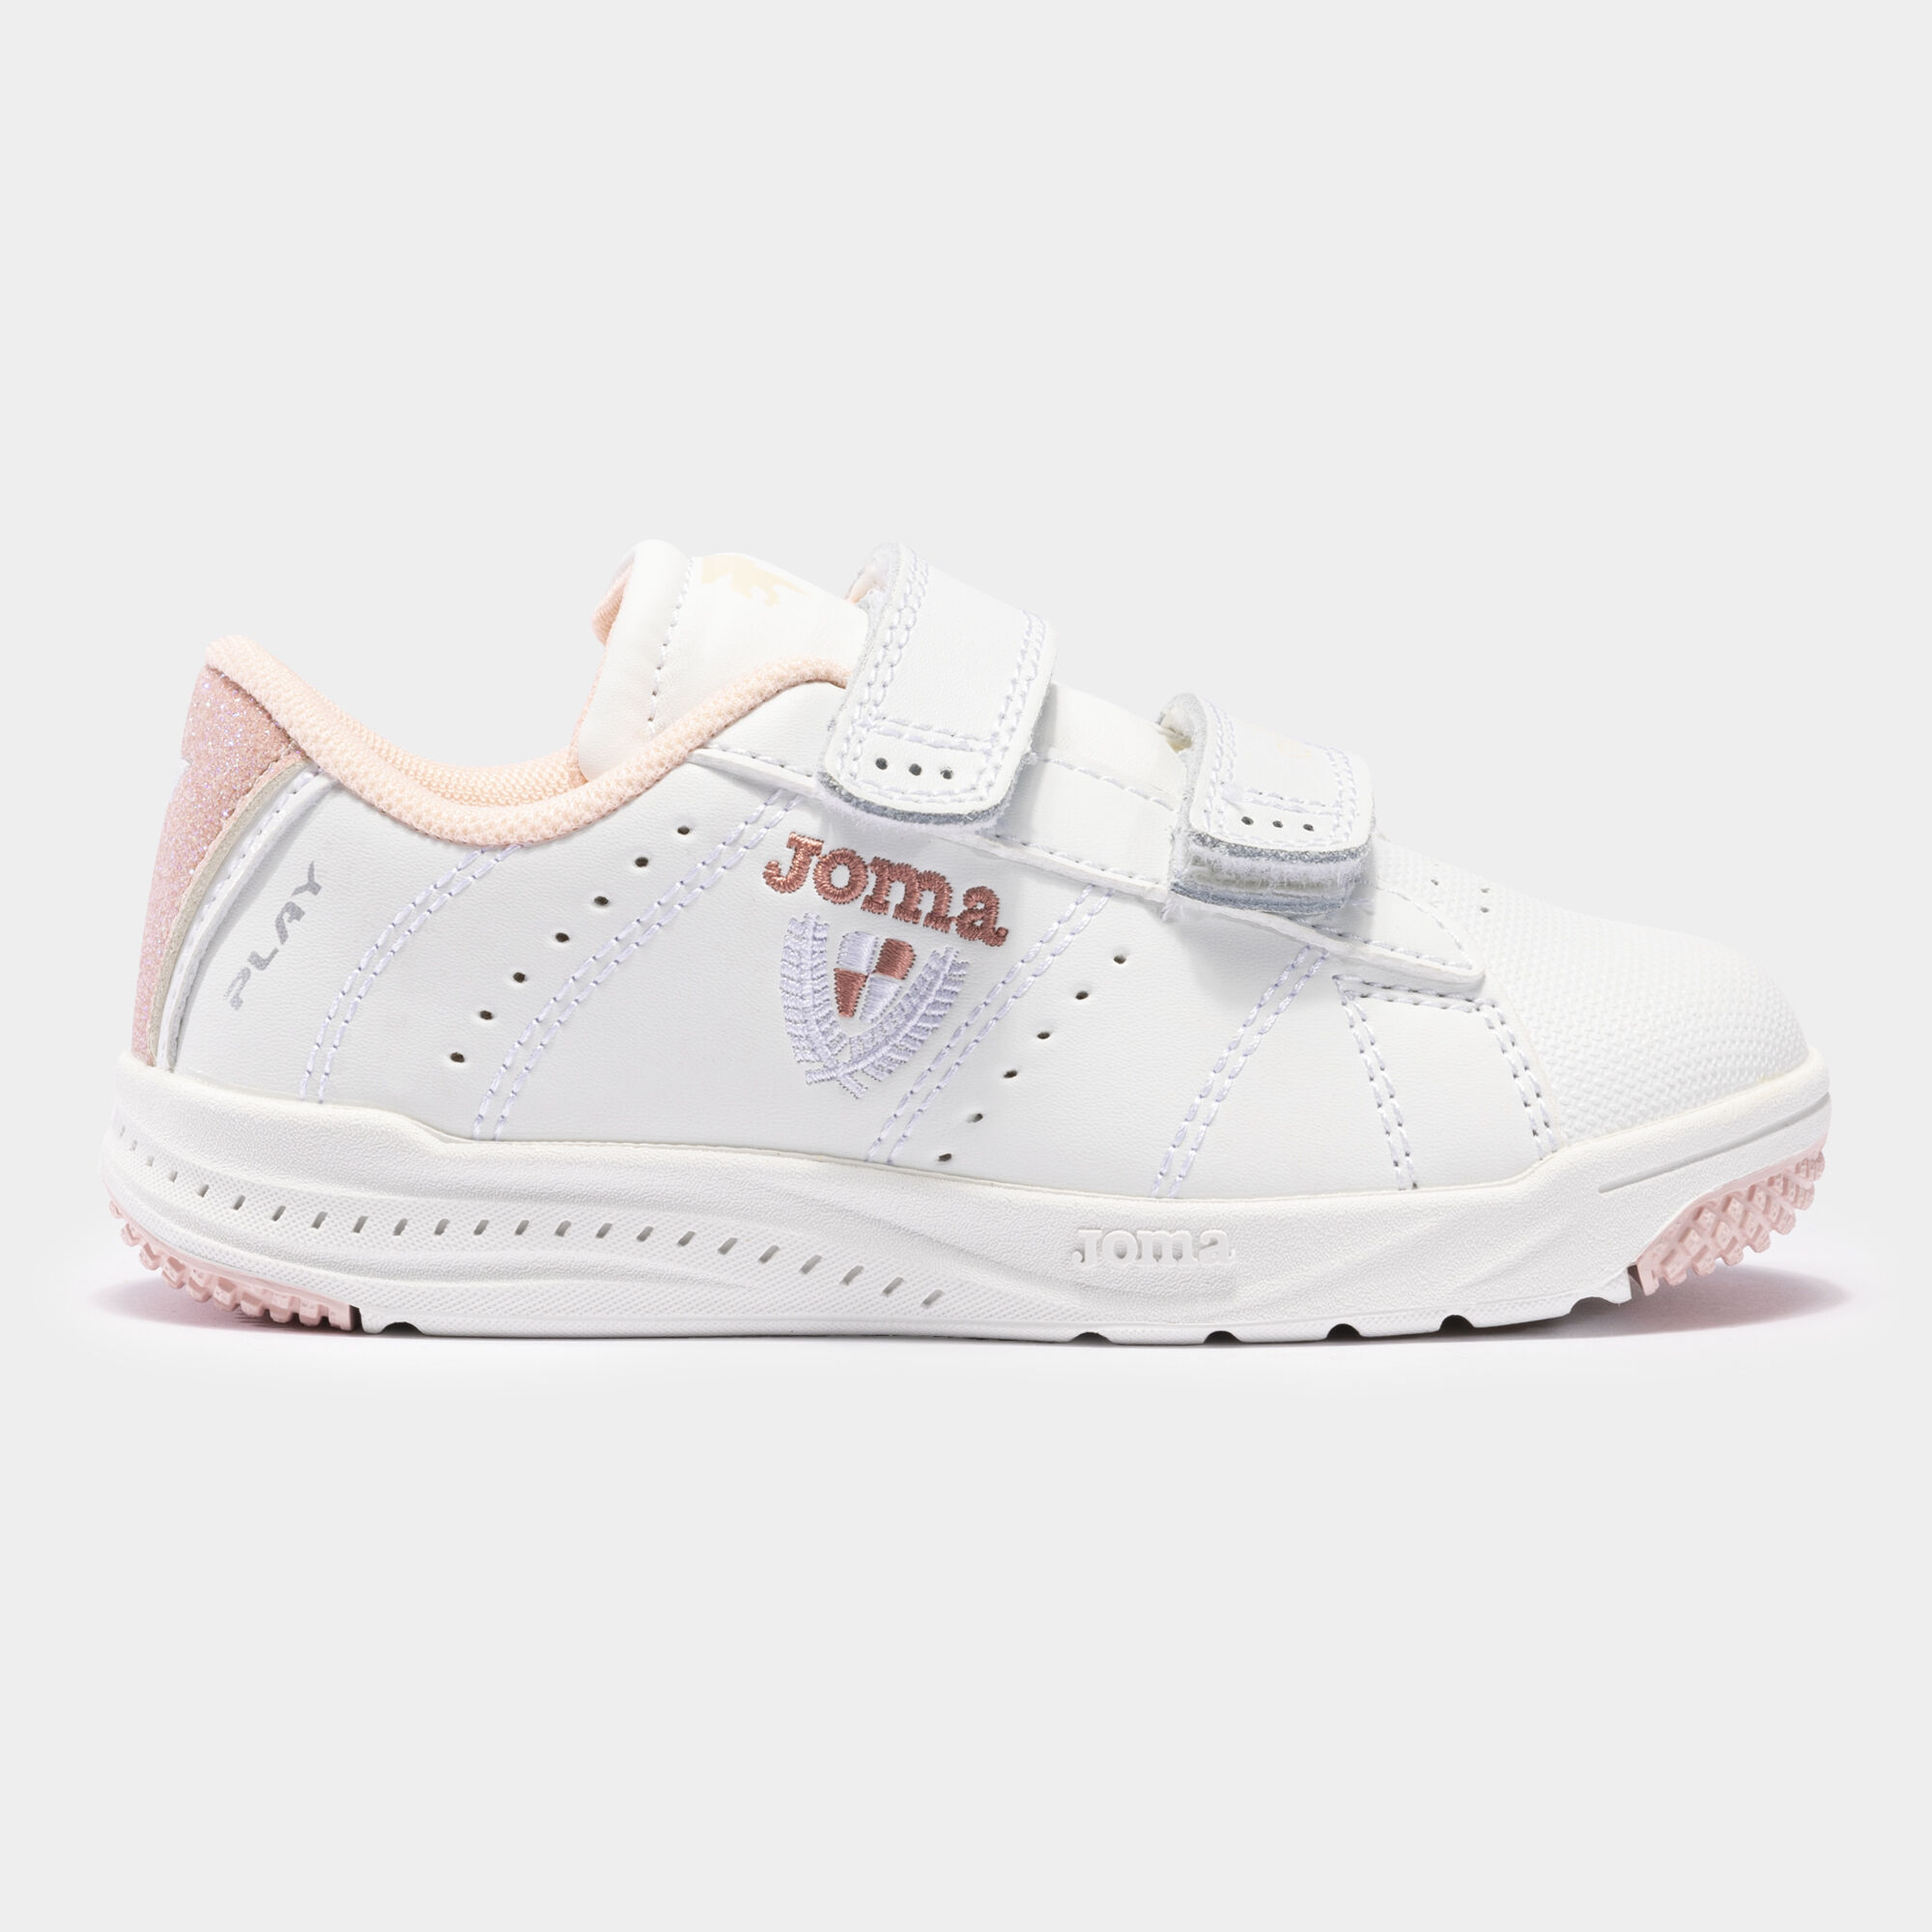 Chaussures casual Play 21 junior blanc rose